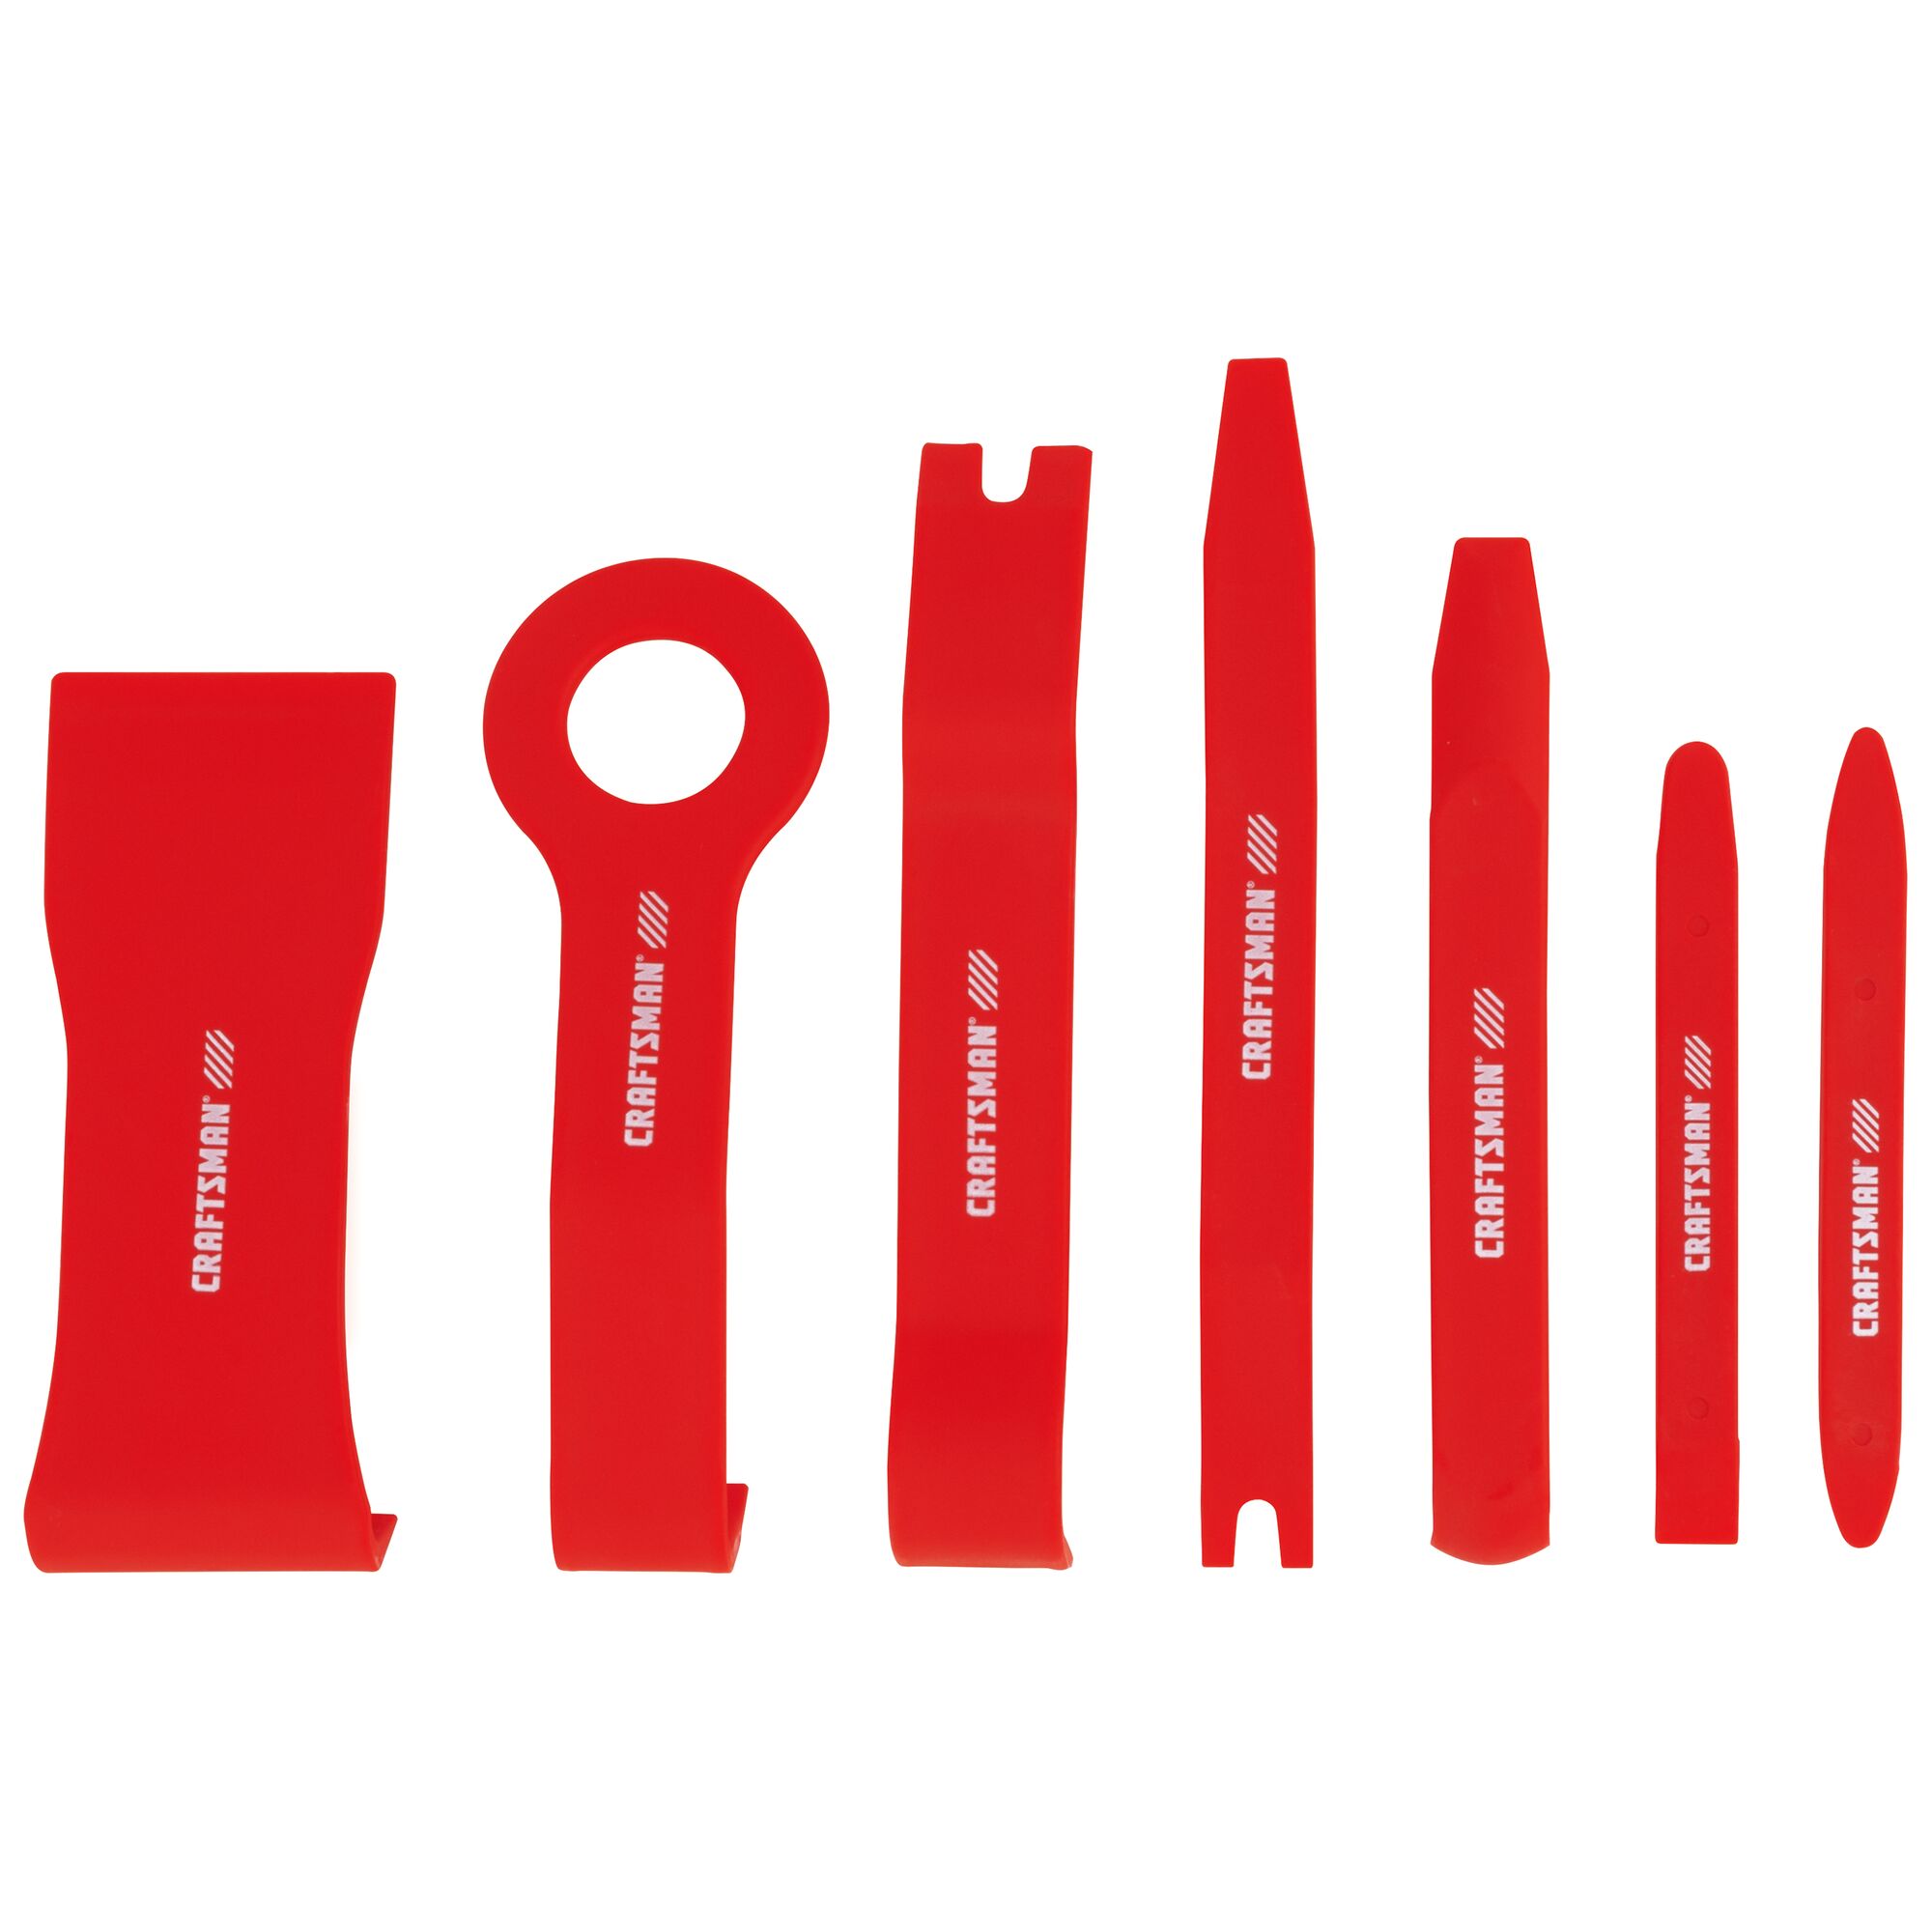 CRAFTSMAN Automotive Trim Removal Kit in the Automotive Hand Tools